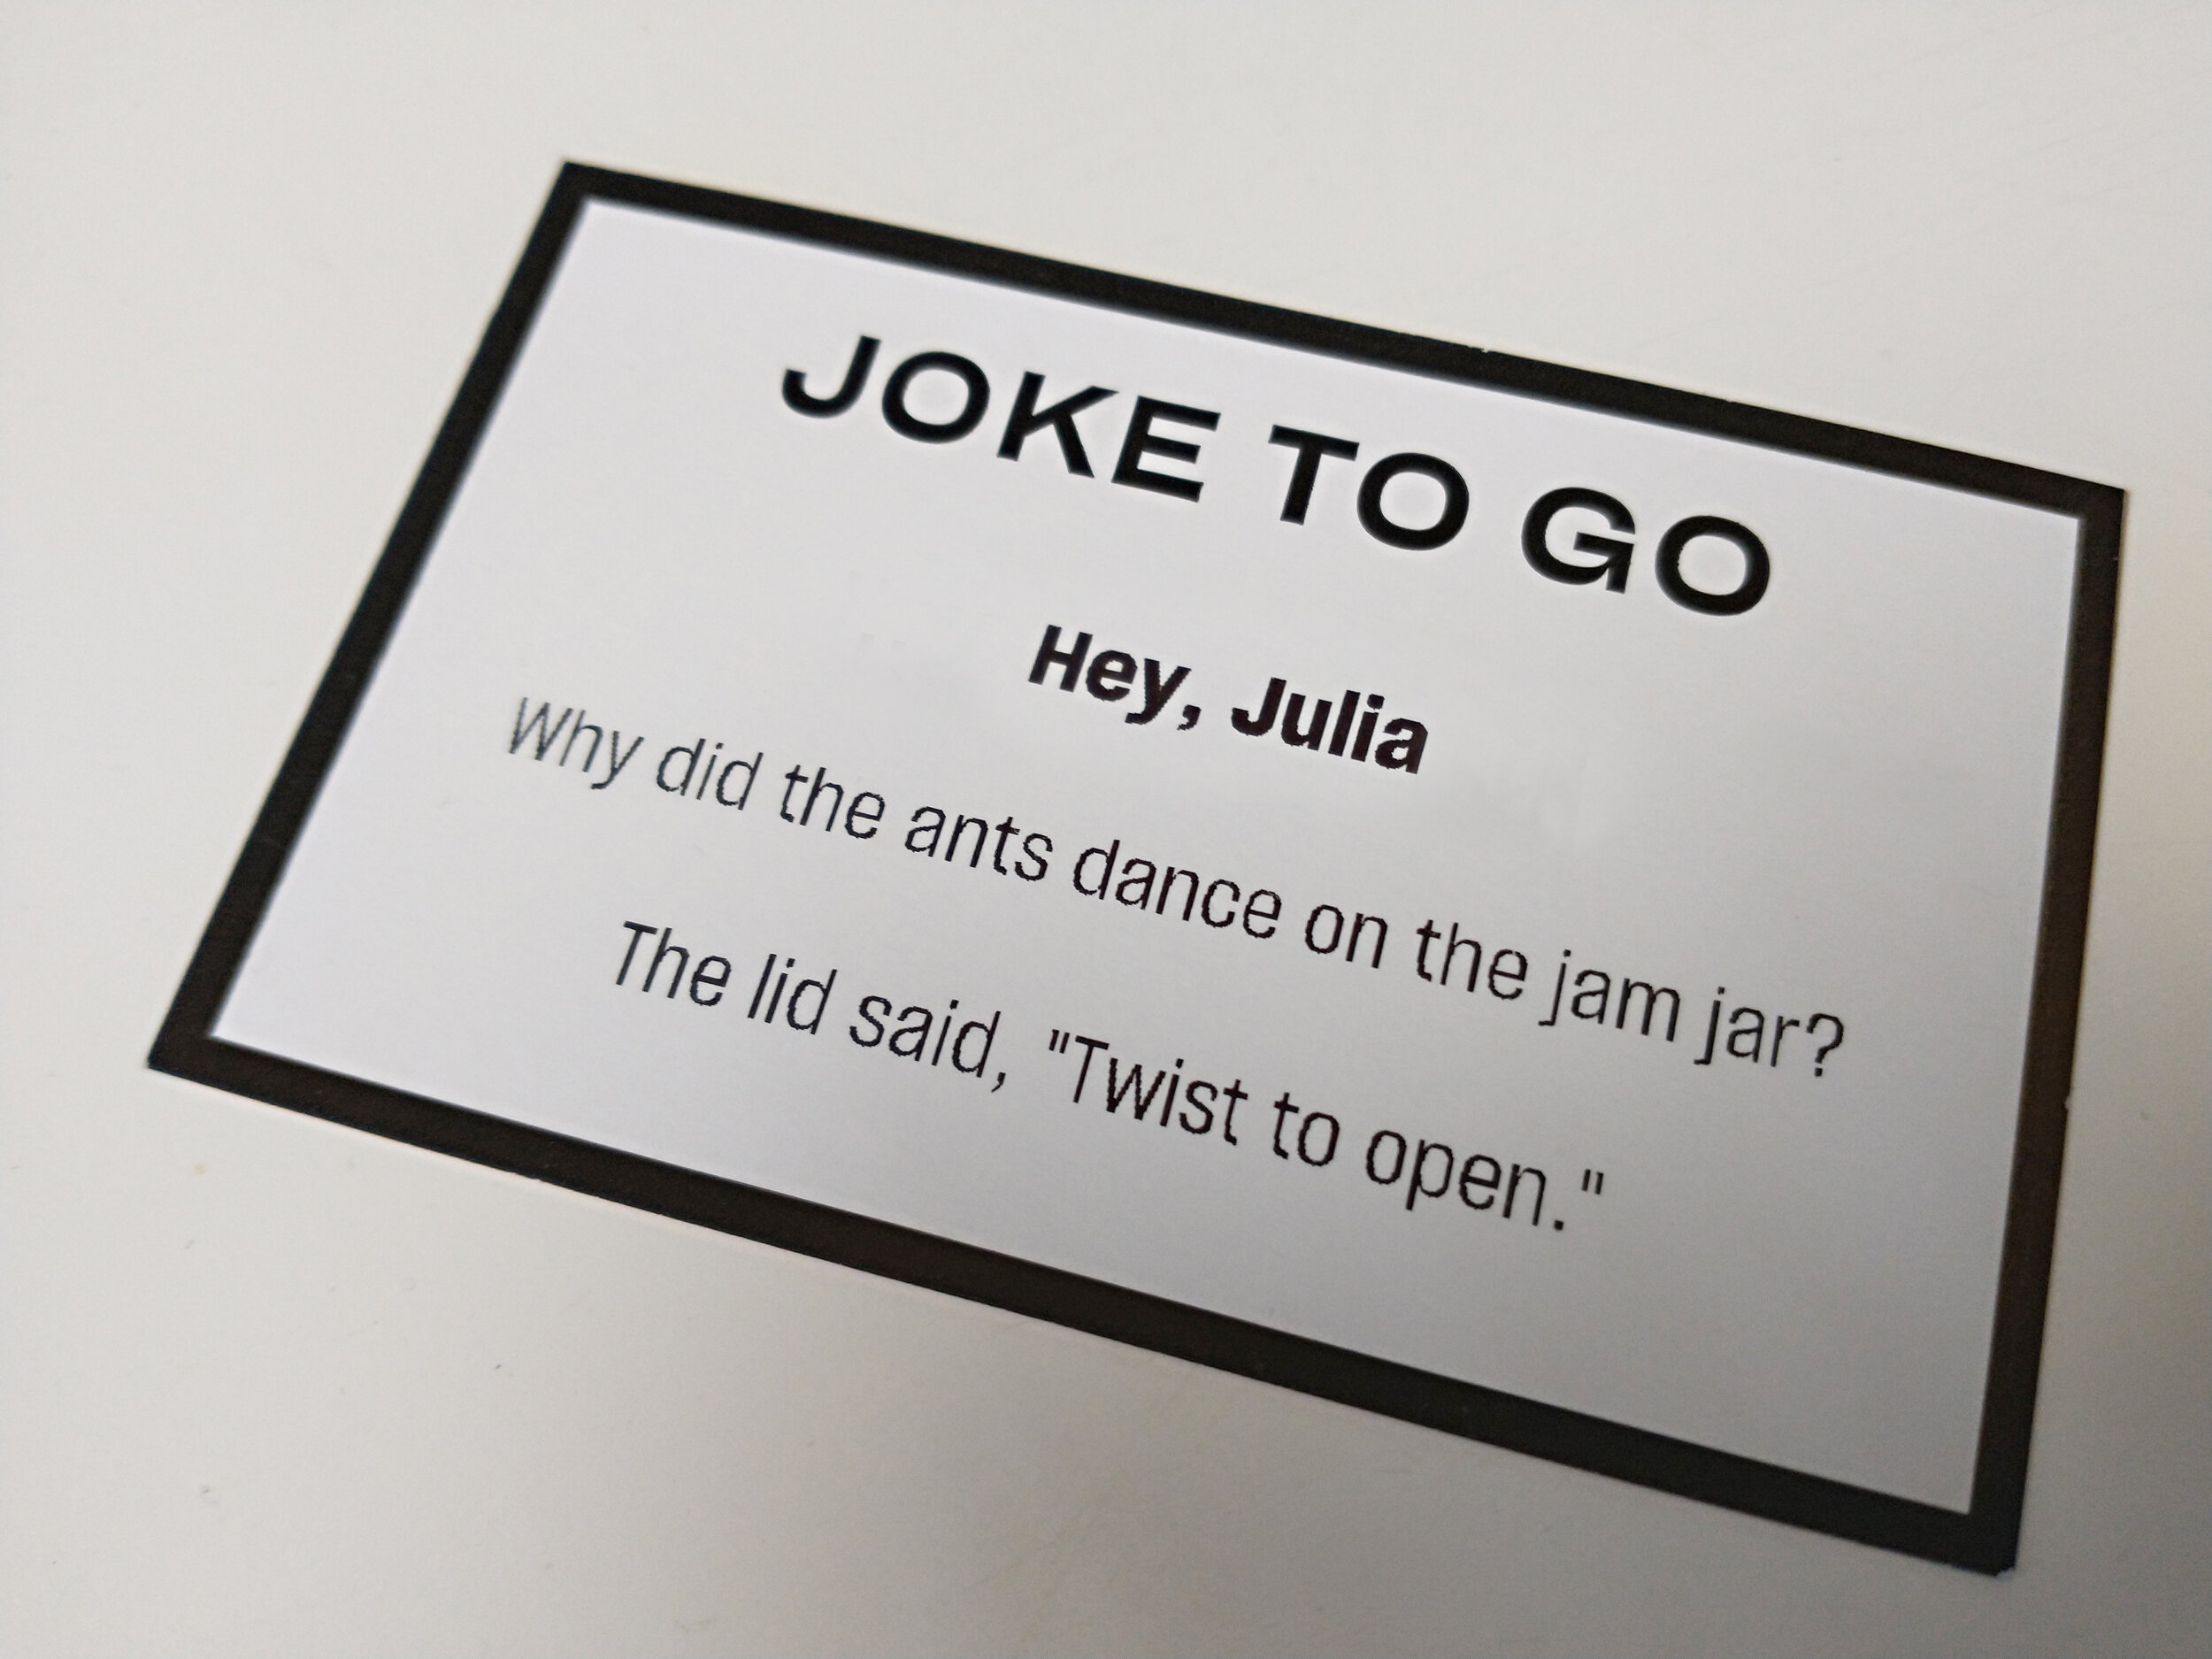 Be sure to get a “joke to go” on your way out (before the gift shop).